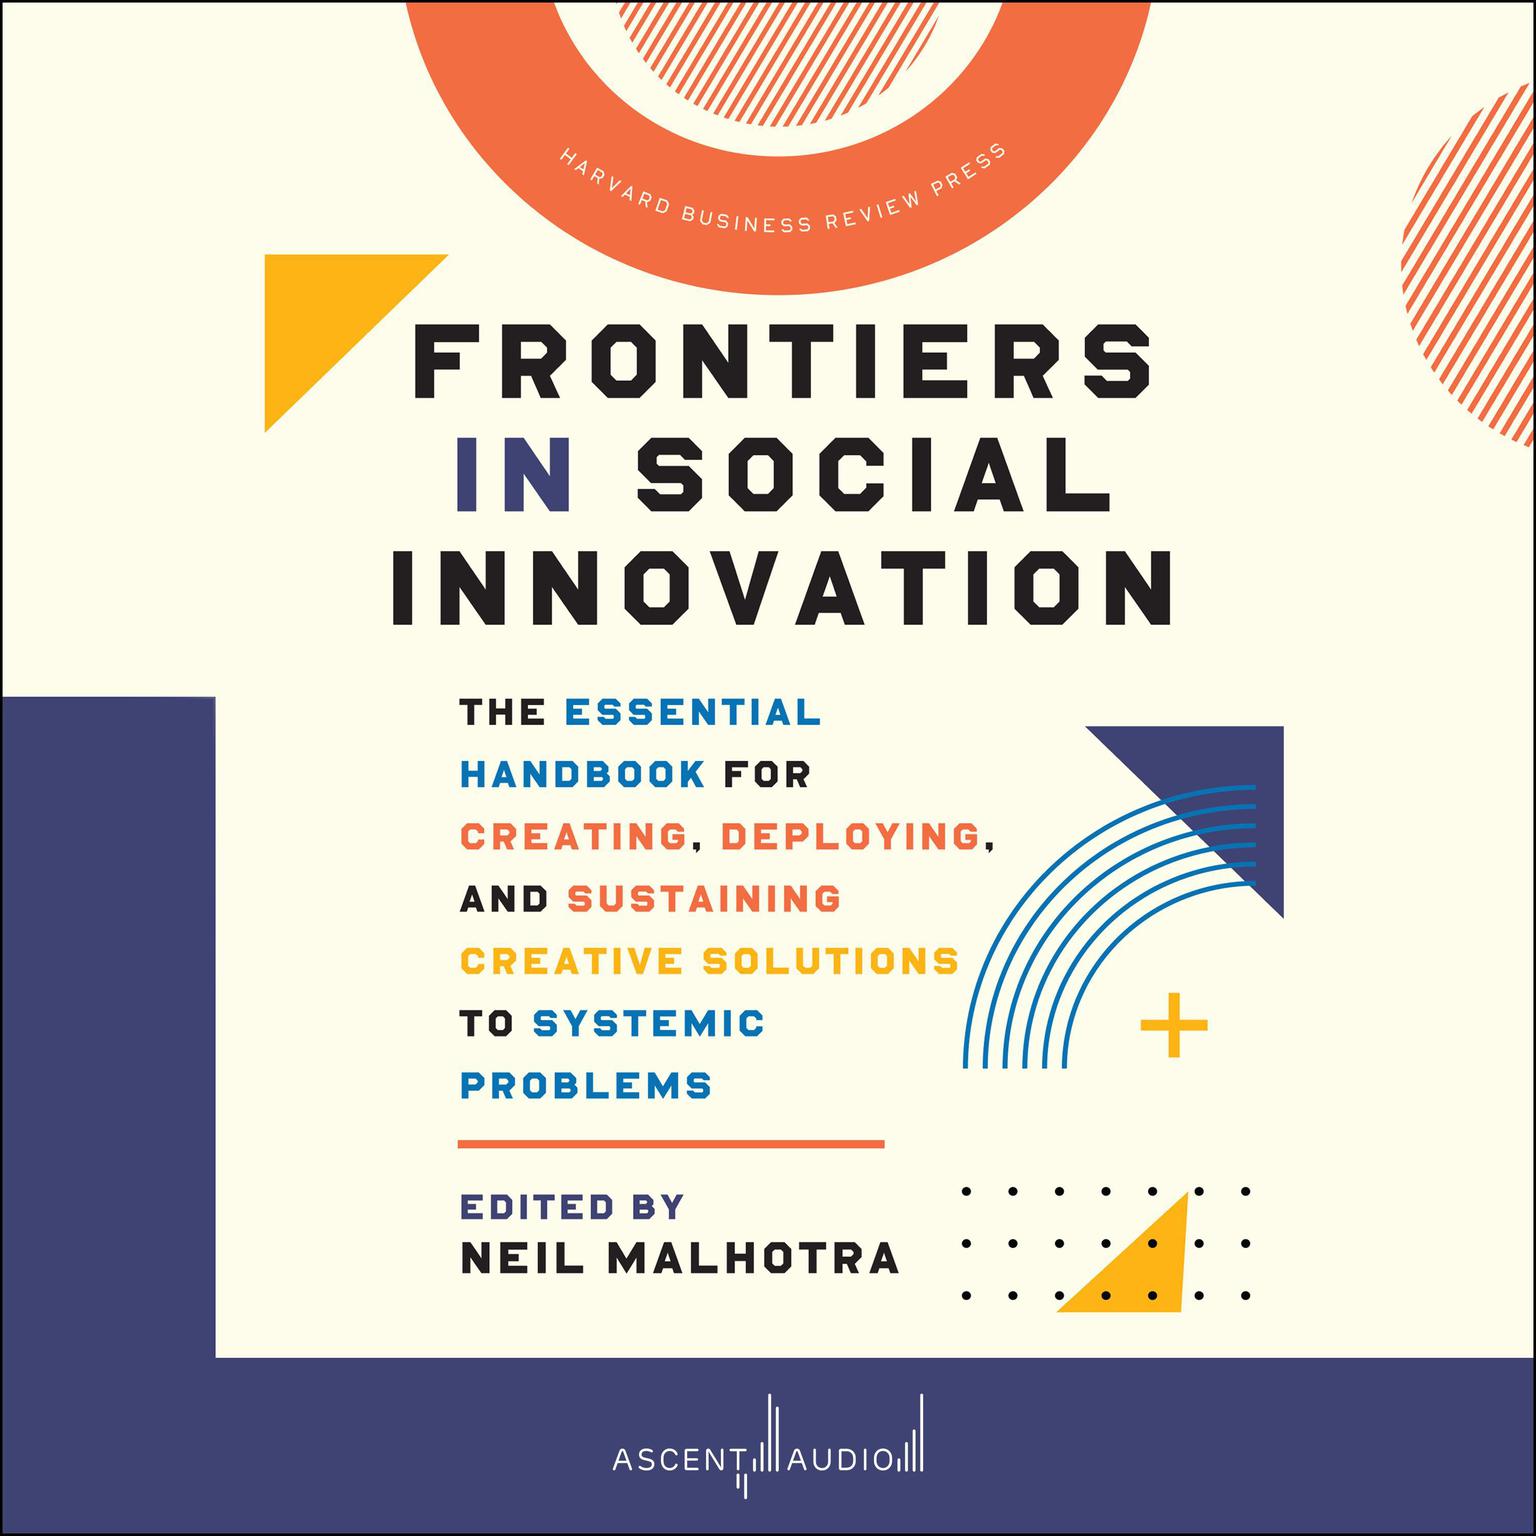 Frontiers in Social Innovation: The Essential Handbook for Creating, Deploying, and Sustaining Creative Solutions to Systemic Problems Audiobook, by Neil Malhotra